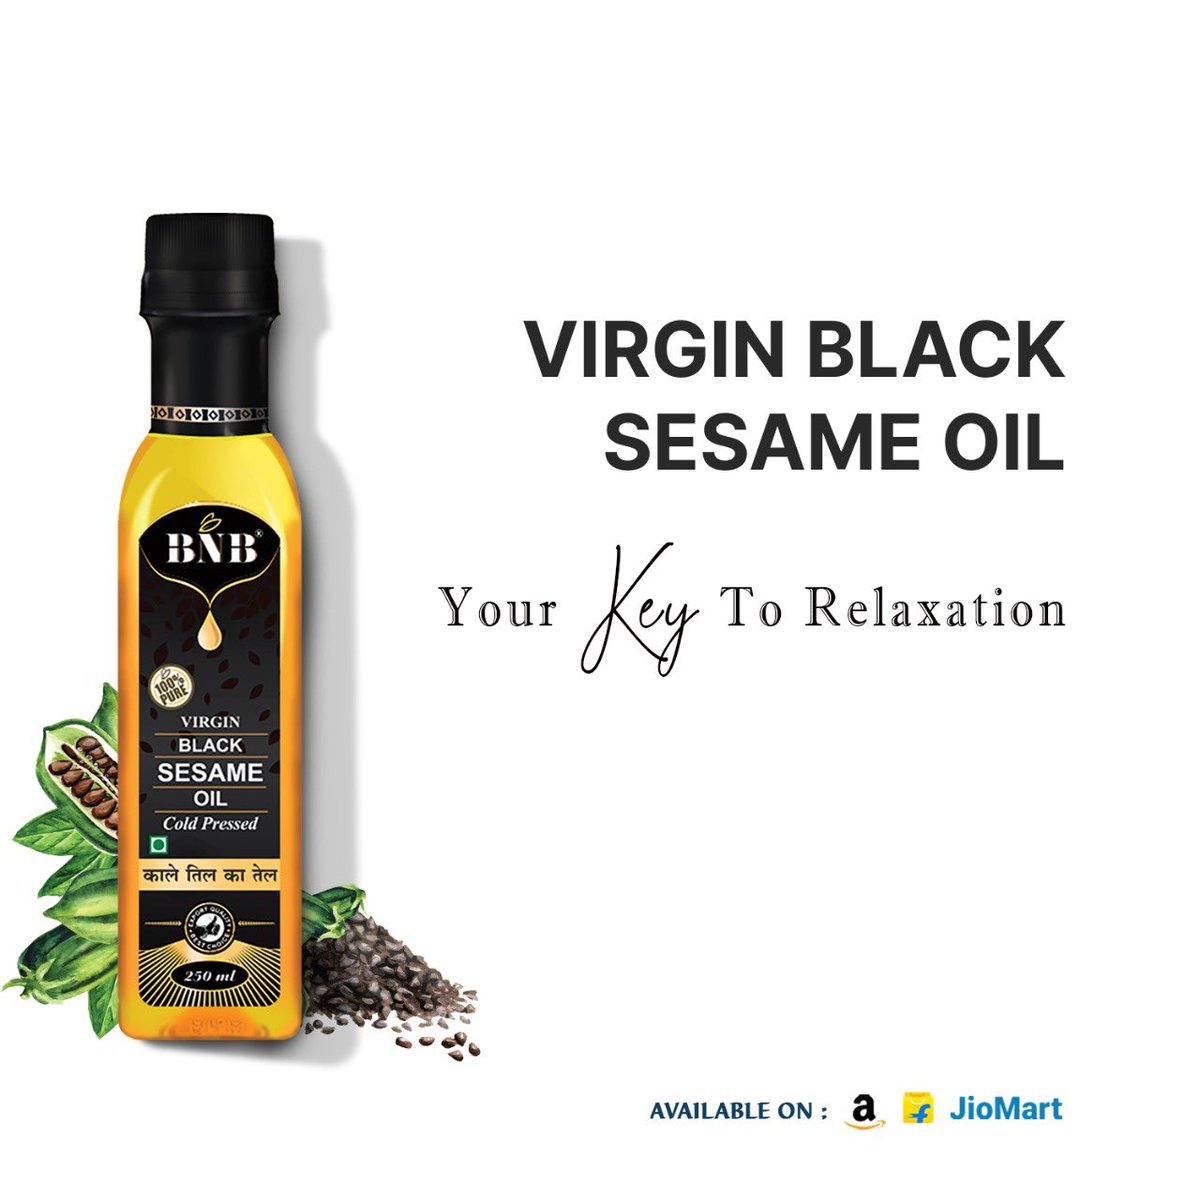 Listen to your body, mind, spirit and take out some time to relax and rub off the stress of life. 

Presenting Virgin Black Sesame Oil for Body Massage. 

#massage #massagetherapy #blacksesame #relax #spa #coldpressed #switchtobnb